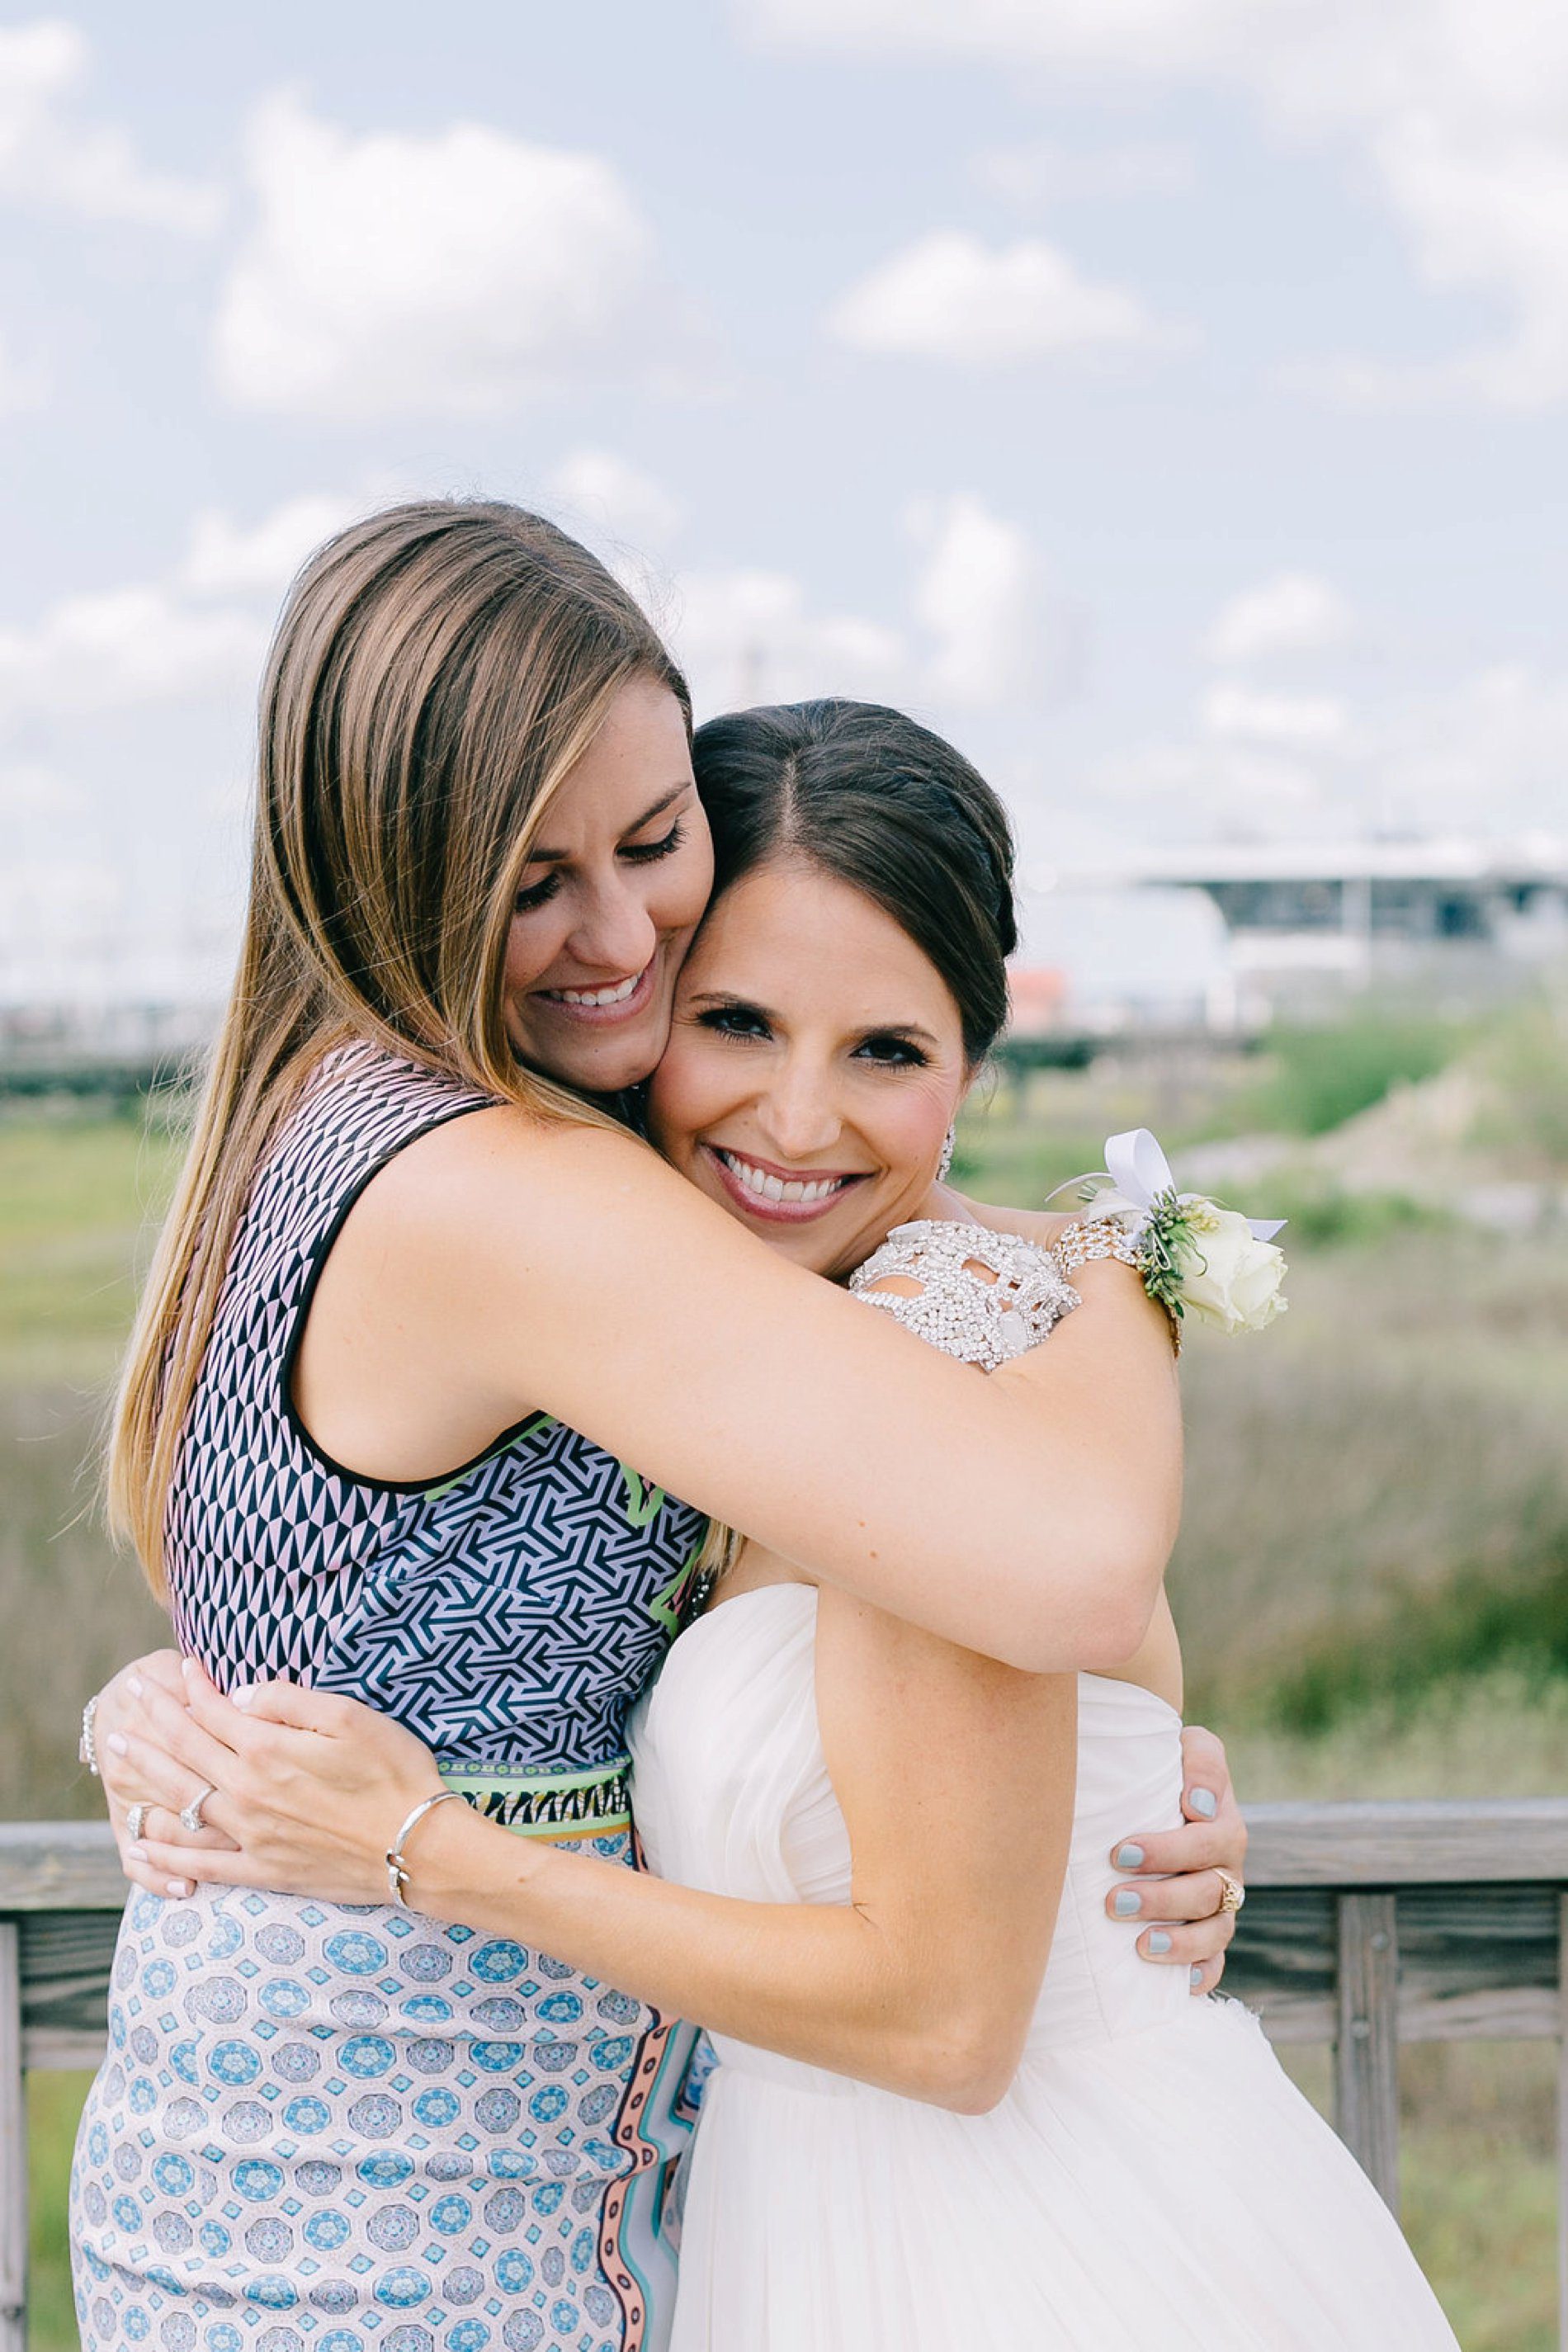 Sweet photo of the bride and her friend hugging